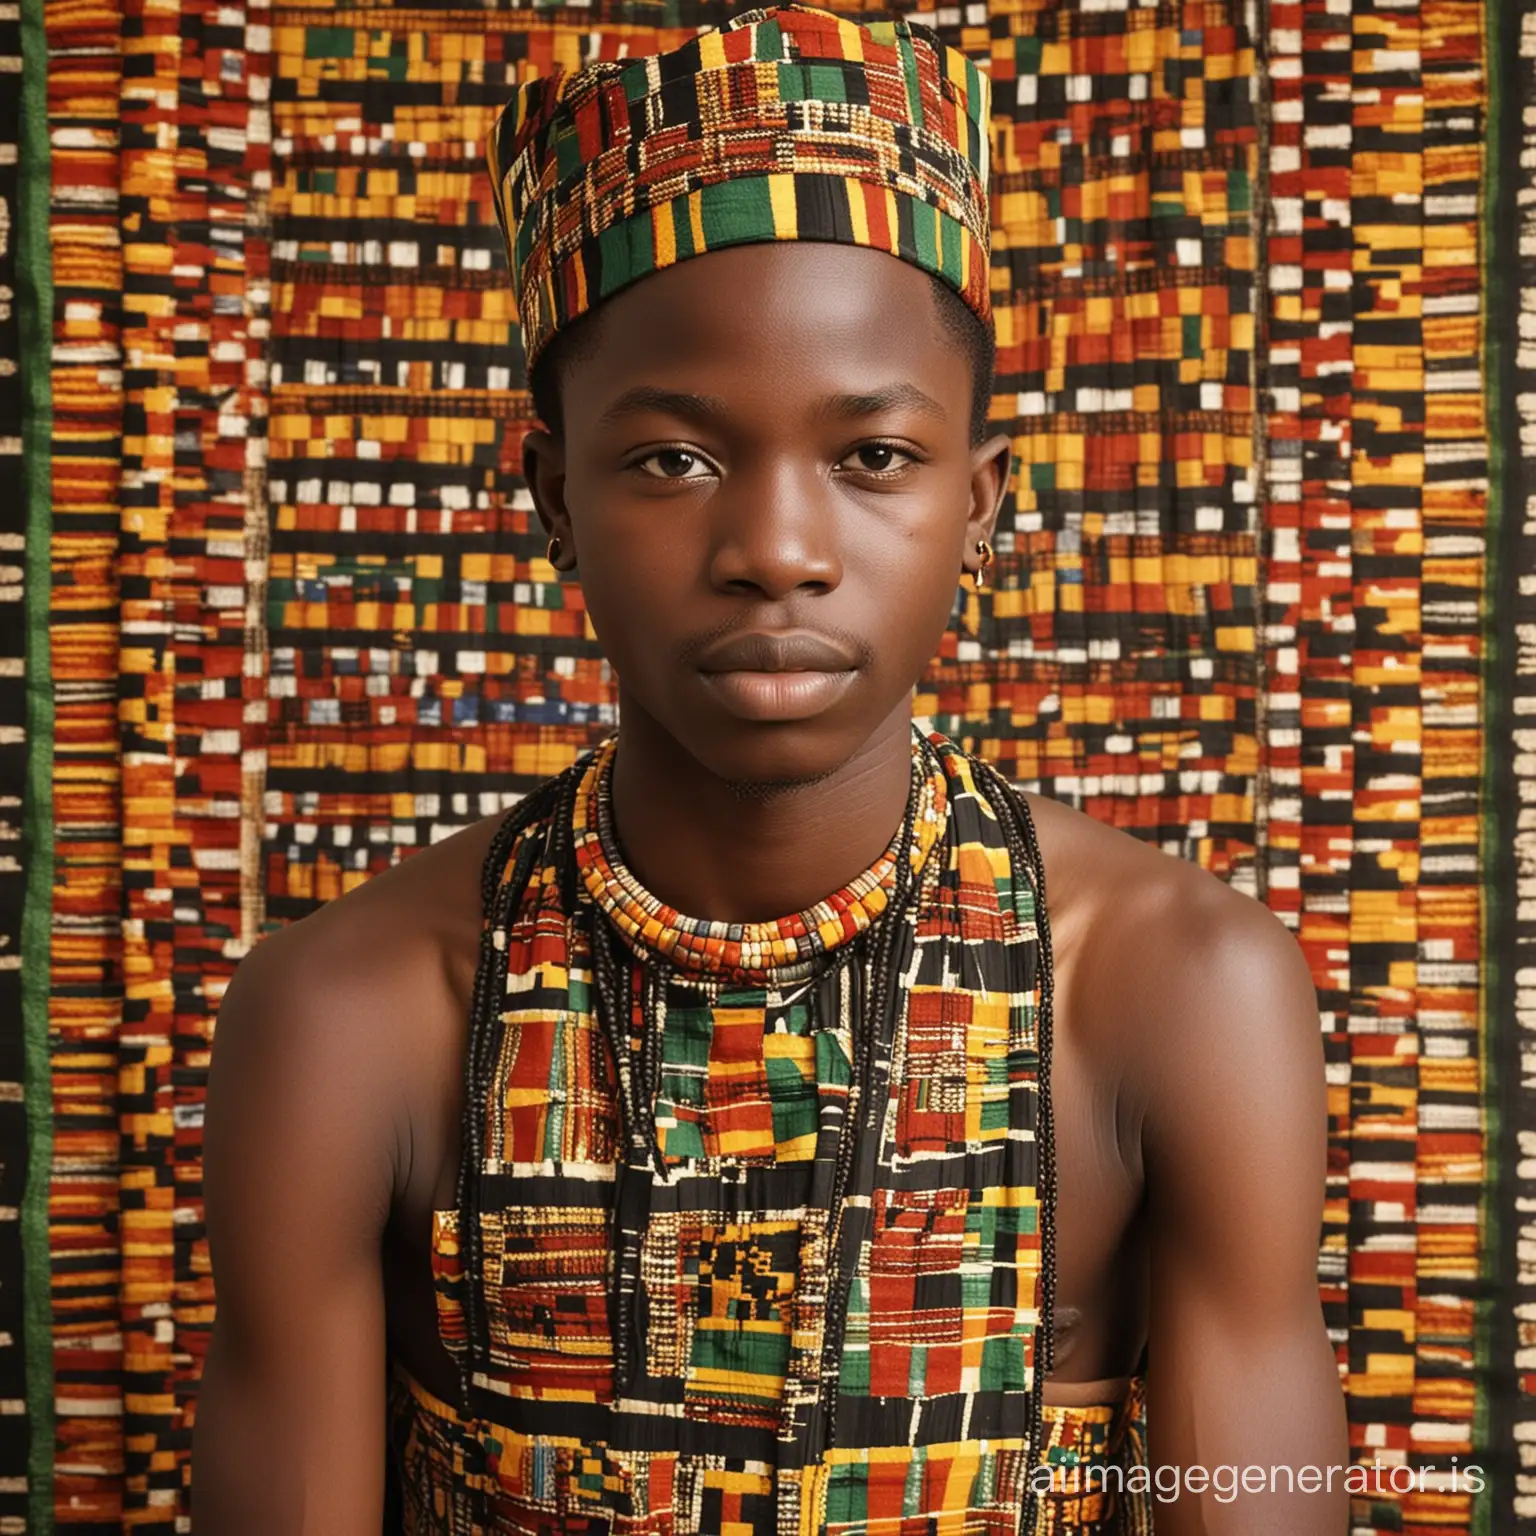 15 year old Akan king adorn with Kente cloth